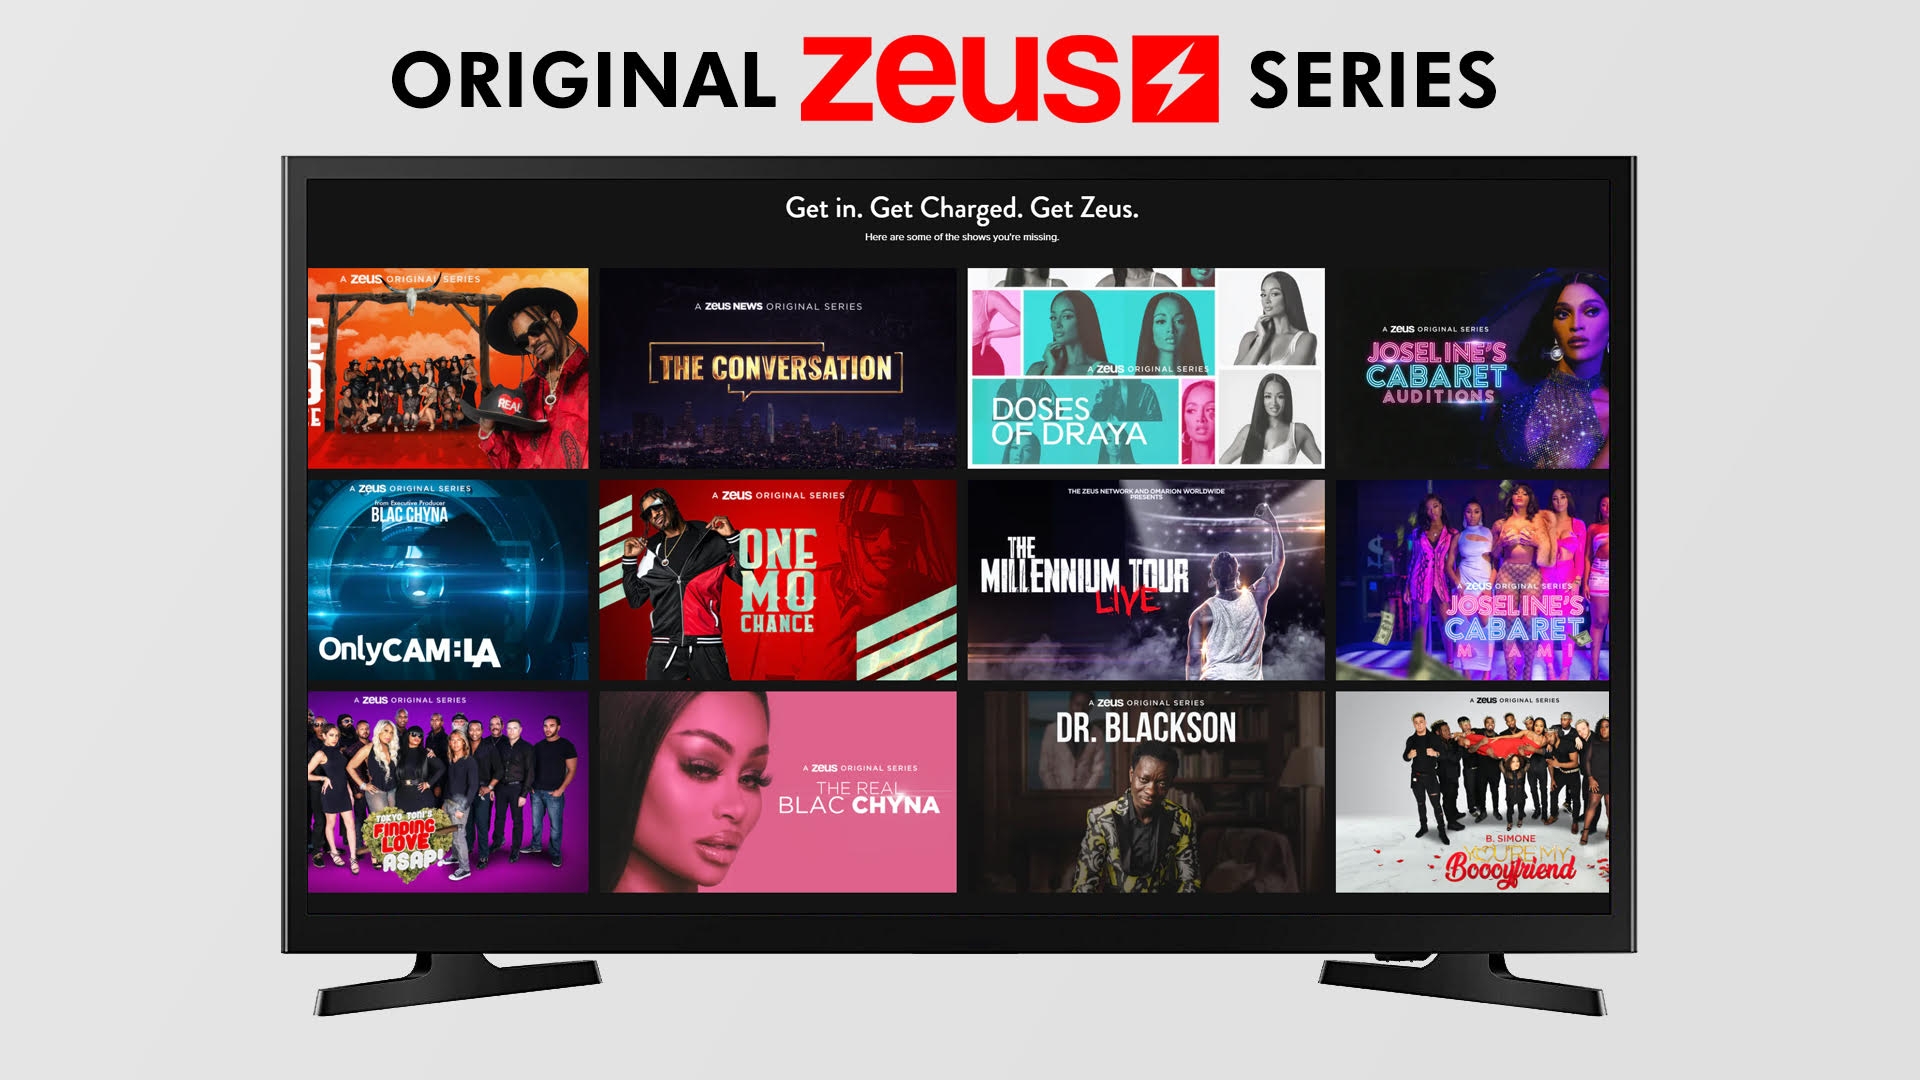 In this article, we are going to be covering TheZeusNetwork/activate: How to activate Zeus Network, so you can enjoy this streaming service on any device.